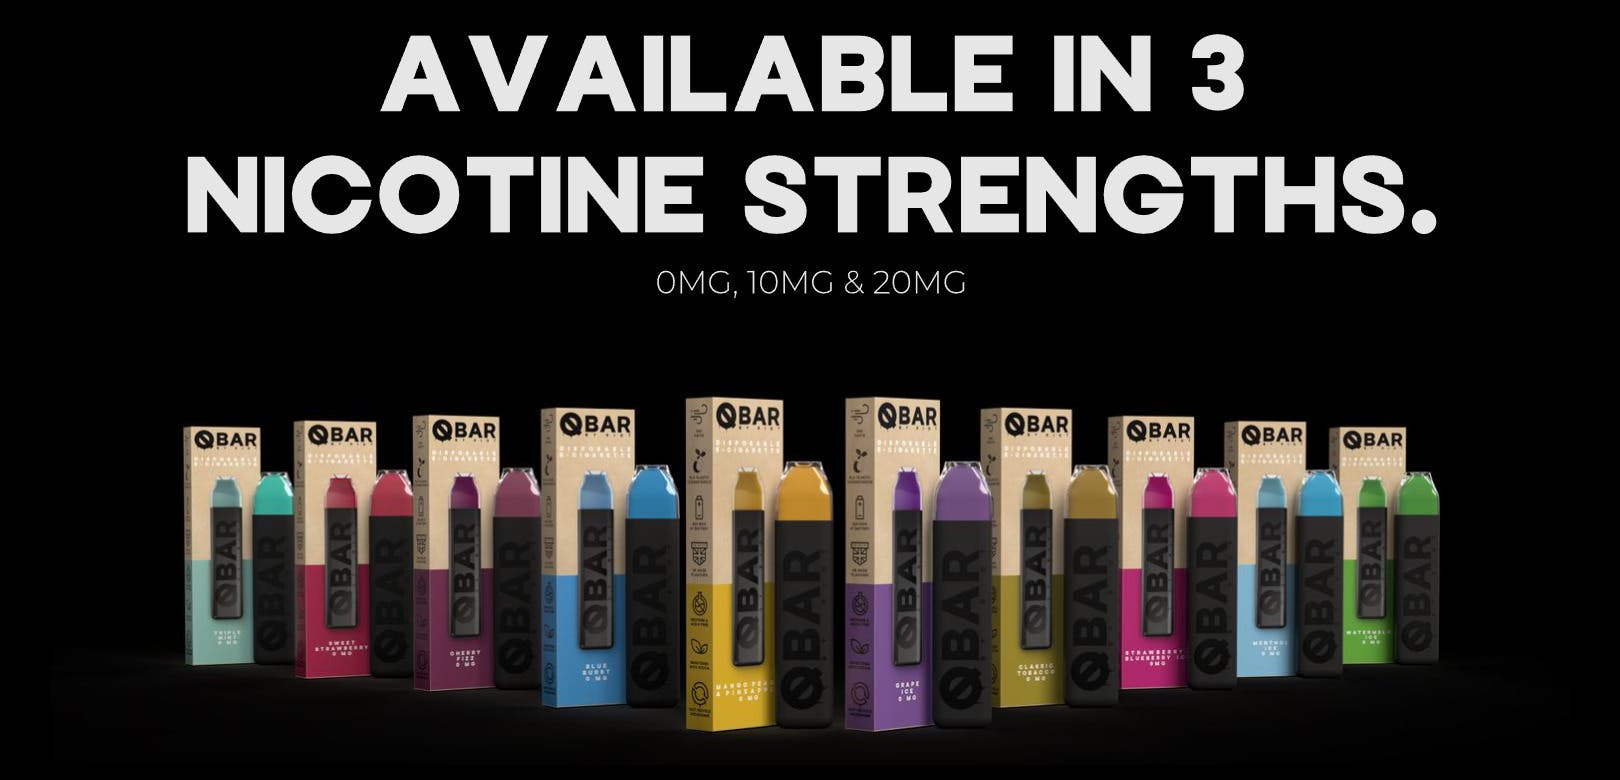 available in 3 nicotine strengths. 0mg, 10mg and 20mg.